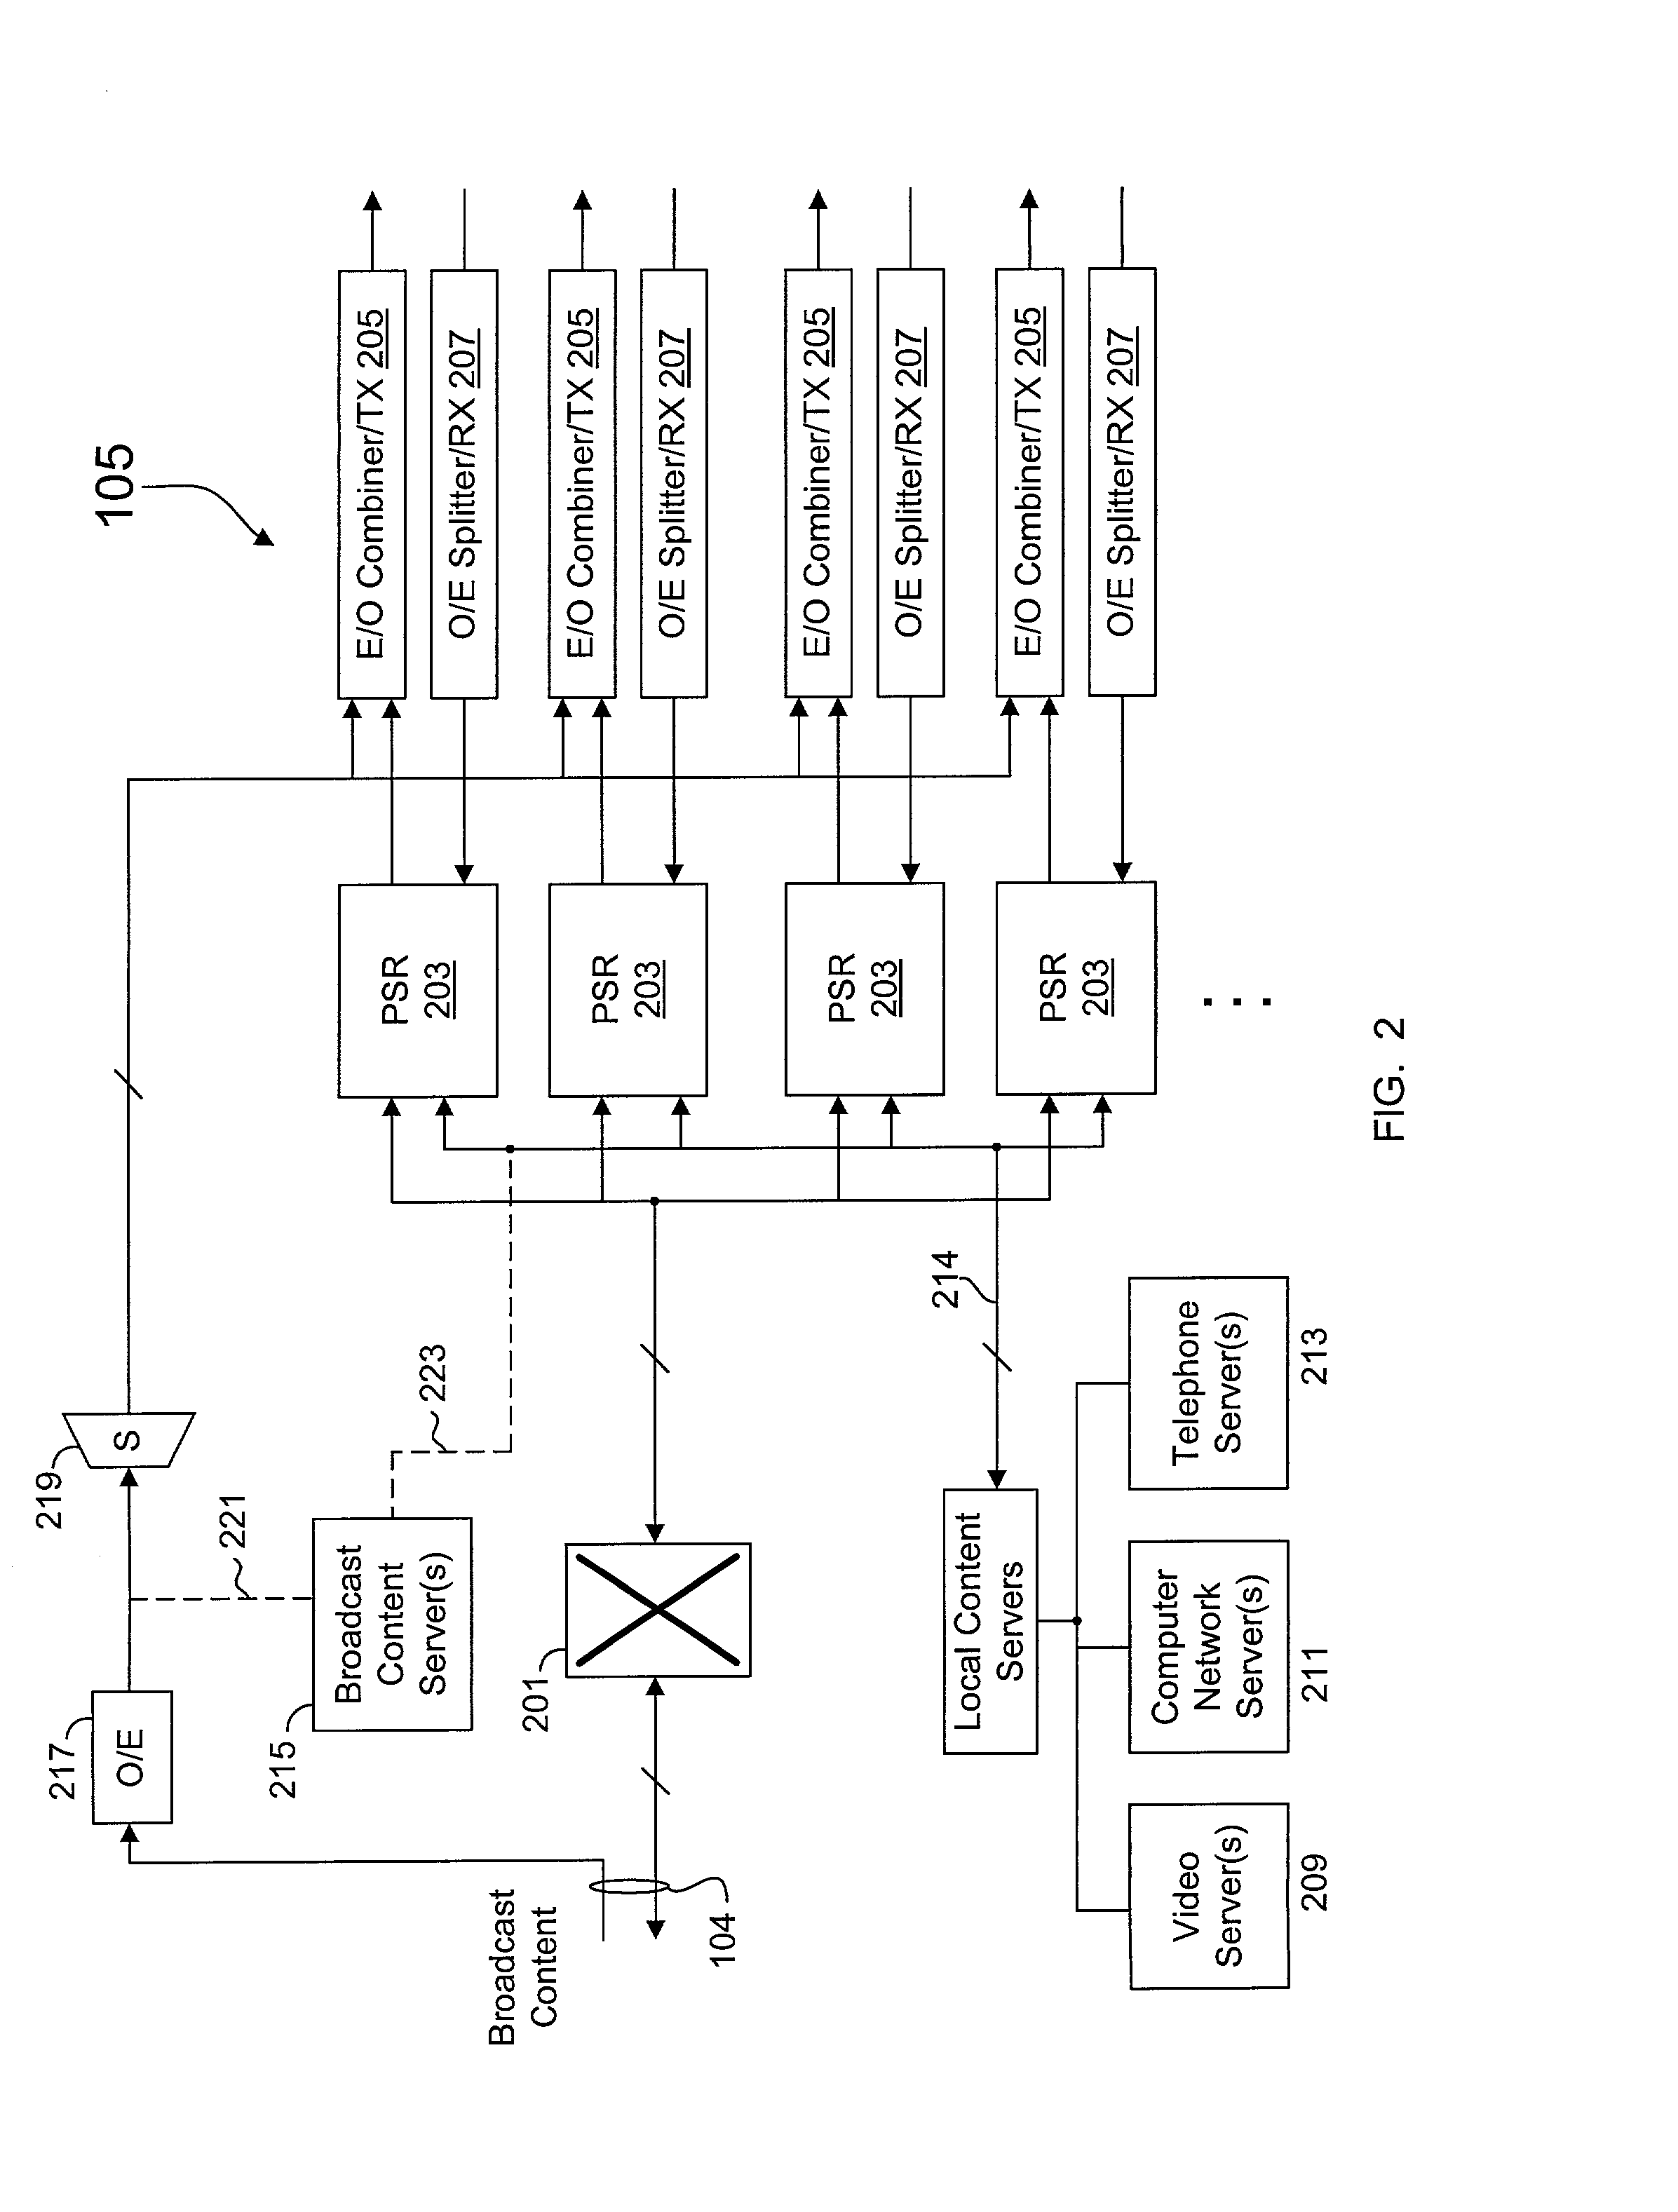 Time division multiplexing over broadband modulation method and apparatus